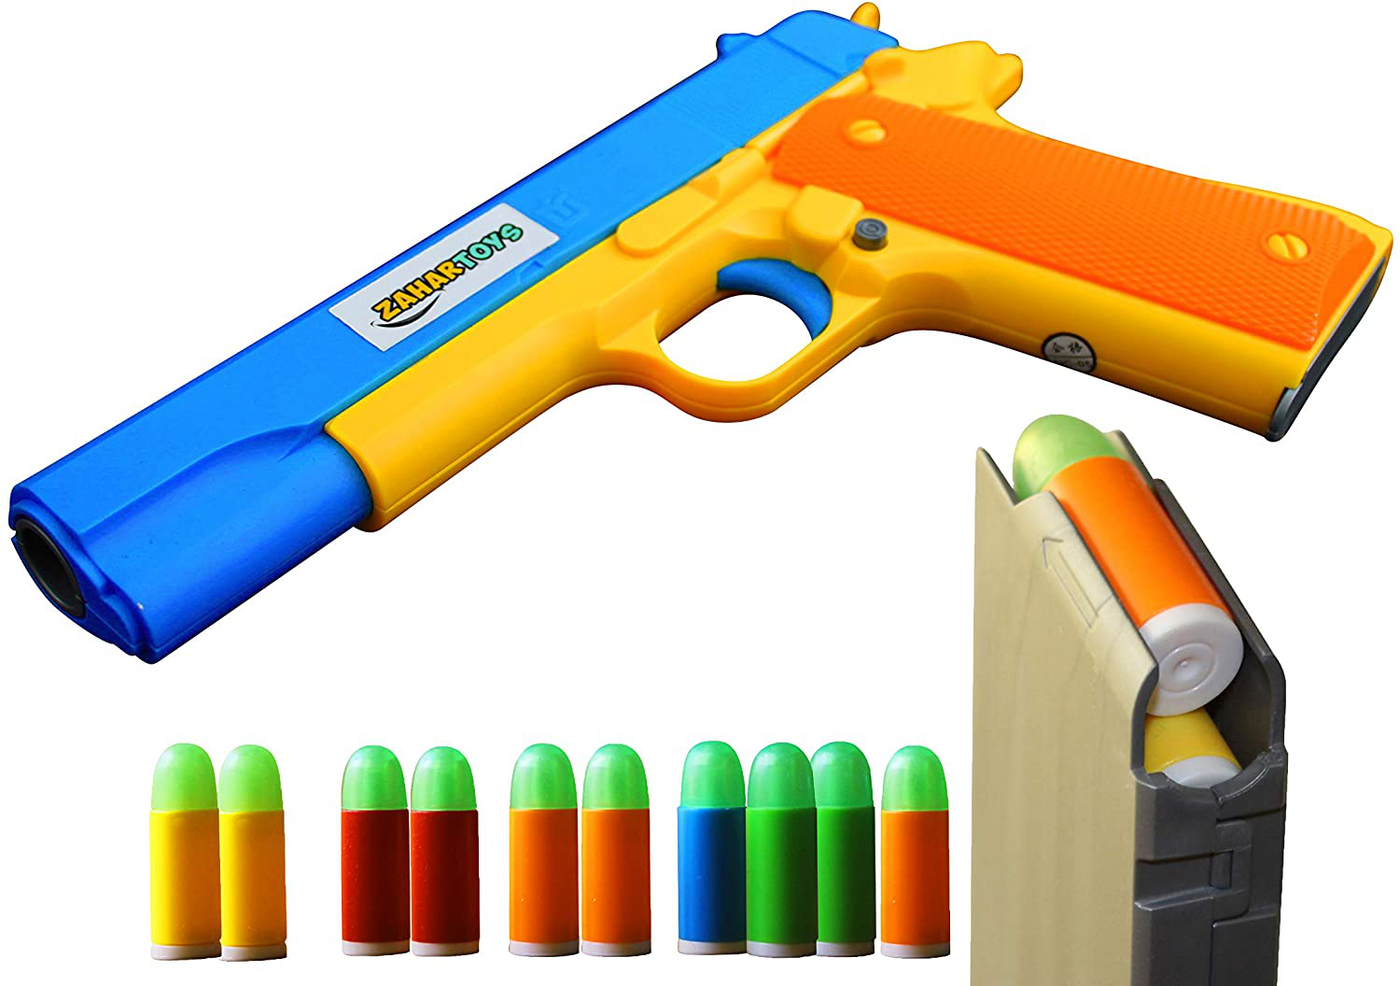 ZAHAR Toys - Realistic Size Toy Gun - Colt 1911 - 10 Colorful Soft Bullets - Ejecting Magazine - Slide Action Barrel – Training, Cosplay, Play – Toy Guns M1911 - Pistol with Soft Bullets